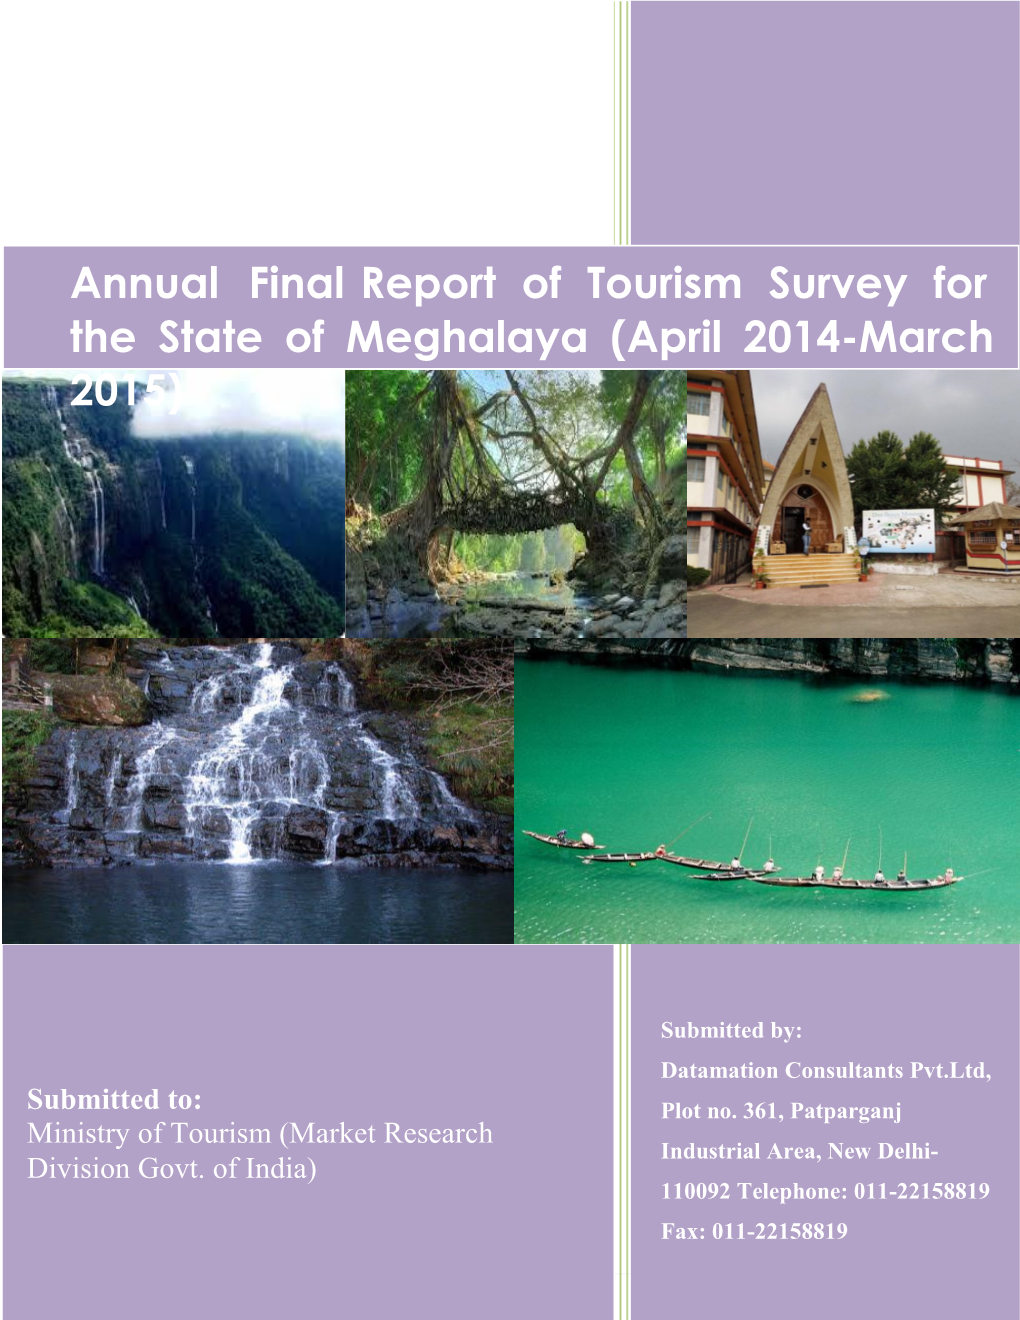 Annual Final Report of Tourism Survey for the State of Meghalaya (April 2014-March 2015)